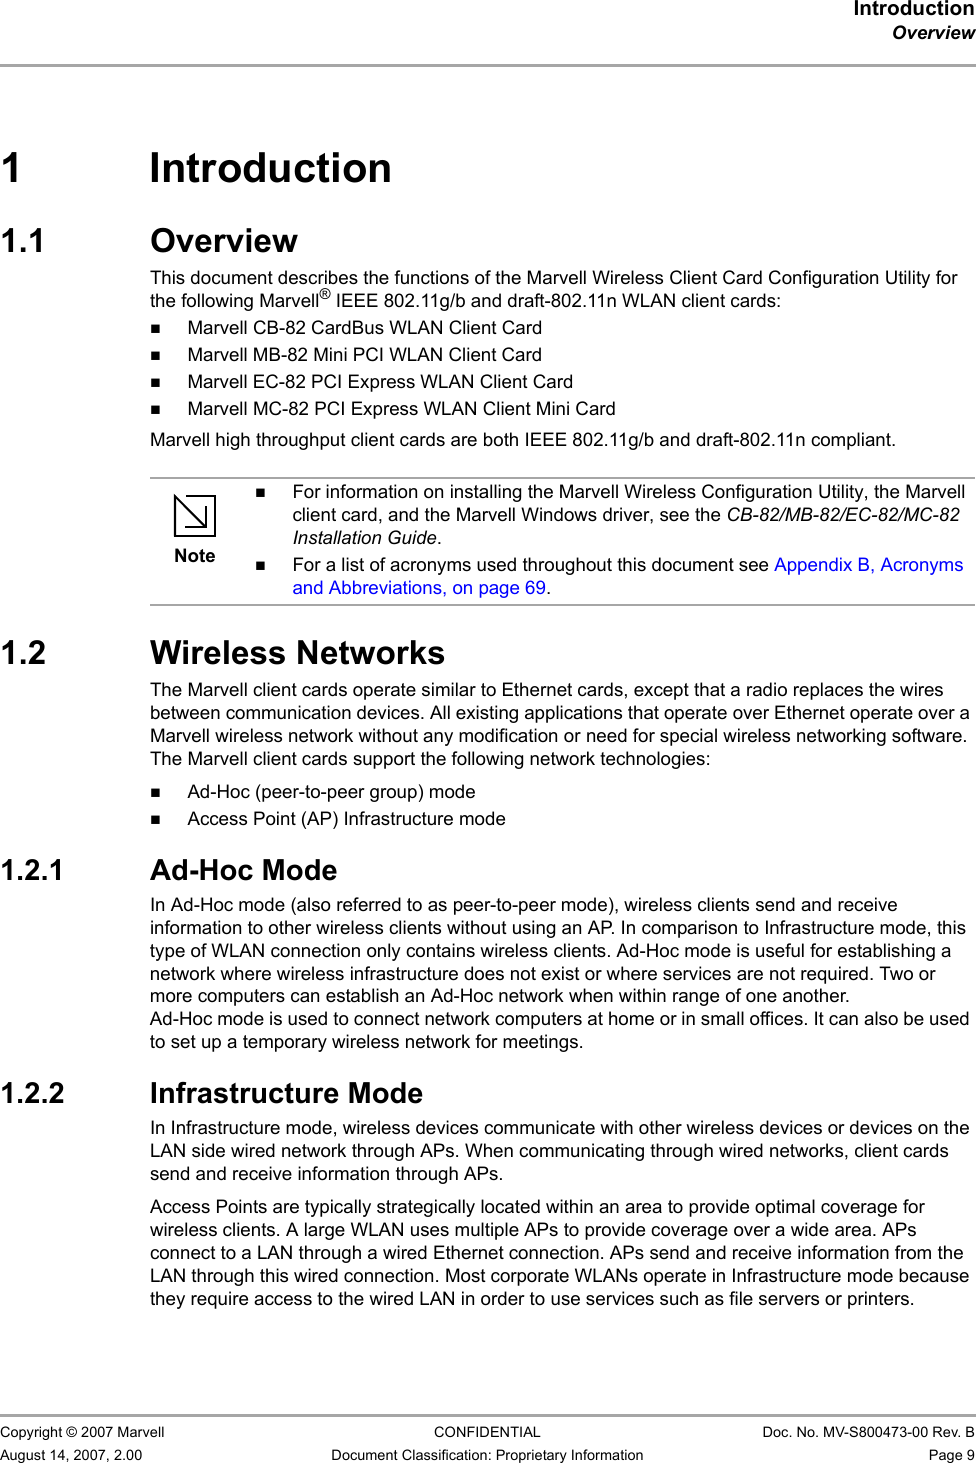 IntroductionOverview                         Copyright © 2007 Marvell CONFIDENTIAL Doc. No. MV-S800473-00 Rev. BAugust 14, 2007, 2.00 Document Classification: Proprietary Information Page 9 1 Introduction1.1 OverviewThis document describes the functions of the Marvell Wireless Client Card Configuration Utility for the following Marvell® IEEE 802.11g/b and draft-802.11n WLAN client cards:Marvell CB-82 CardBus WLAN Client CardMarvell MB-82 Mini PCI WLAN Client CardMarvell EC-82 PCI Express WLAN Client CardMarvell MC-82 PCI Express WLAN Client Mini CardMarvell high throughput client cards are both IEEE 802.11g/b and draft-802.11n compliant.1.2 Wireless NetworksThe Marvell client cards operate similar to Ethernet cards, except that a radio replaces the wires between communication devices. All existing applications that operate over Ethernet operate over a Marvell wireless network without any modification or need for special wireless networking software. The Marvell client cards support the following network technologies:Ad-Hoc (peer-to-peer group) modeAccess Point (AP) Infrastructure mode1.2.1 Ad-Hoc ModeIn Ad-Hoc mode (also referred to as peer-to-peer mode), wireless clients send and receive information to other wireless clients without using an AP. In comparison to Infrastructure mode, this type of WLAN connection only contains wireless clients. Ad-Hoc mode is useful for establishing a network where wireless infrastructure does not exist or where services are not required. Two or more computers can establish an Ad-Hoc network when within range of one another. Ad-Hoc mode is used to connect network computers at home or in small offices. It can also be used to set up a temporary wireless network for meetings.1.2.2 Infrastructure ModeIn Infrastructure mode, wireless devices communicate with other wireless devices or devices on the LAN side wired network through APs. When communicating through wired networks, client cards send and receive information through APs.Access Points are typically strategically located within an area to provide optimal coverage for wireless clients. A large WLAN uses multiple APs to provide coverage over a wide area. APs connect to a LAN through a wired Ethernet connection. APs send and receive information from the LAN through this wired connection. Most corporate WLANs operate in Infrastructure mode because they require access to the wired LAN in order to use services such as file servers or printers.NoteFor information on installing the Marvell Wireless Configuration Utility, the Marvell client card, and the Marvell Windows driver, see the CB-82/MB-82/EC-82/MC-82 Installation Guide.For a list of acronyms used throughout this document see Appendix B, Acronyms and Abbreviations, on page 69.